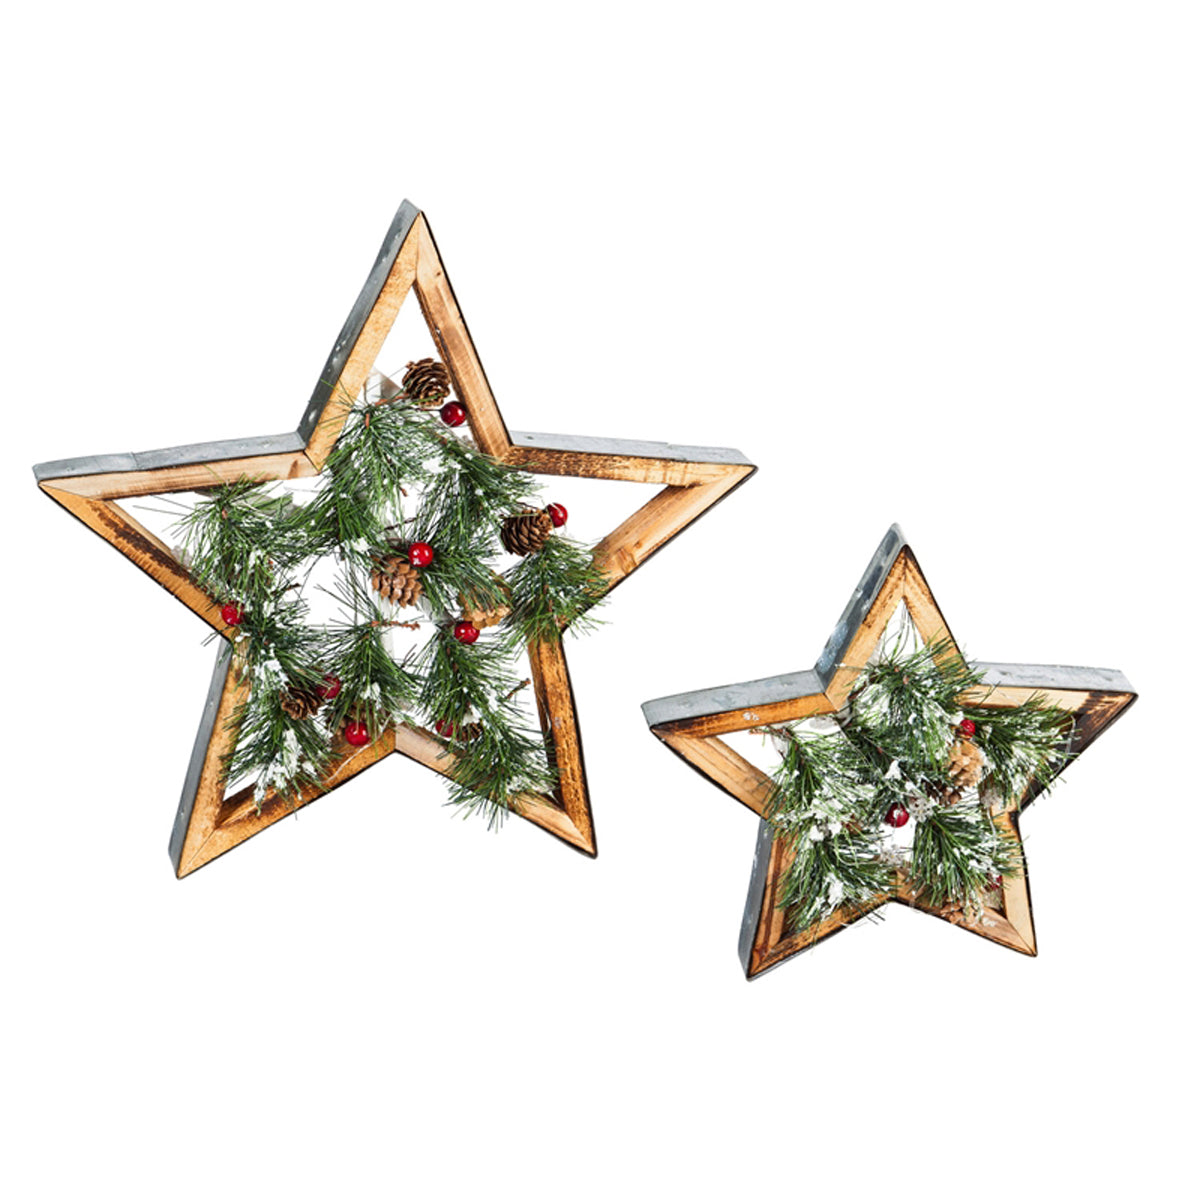 Wooden Star Table Decor, set of 2